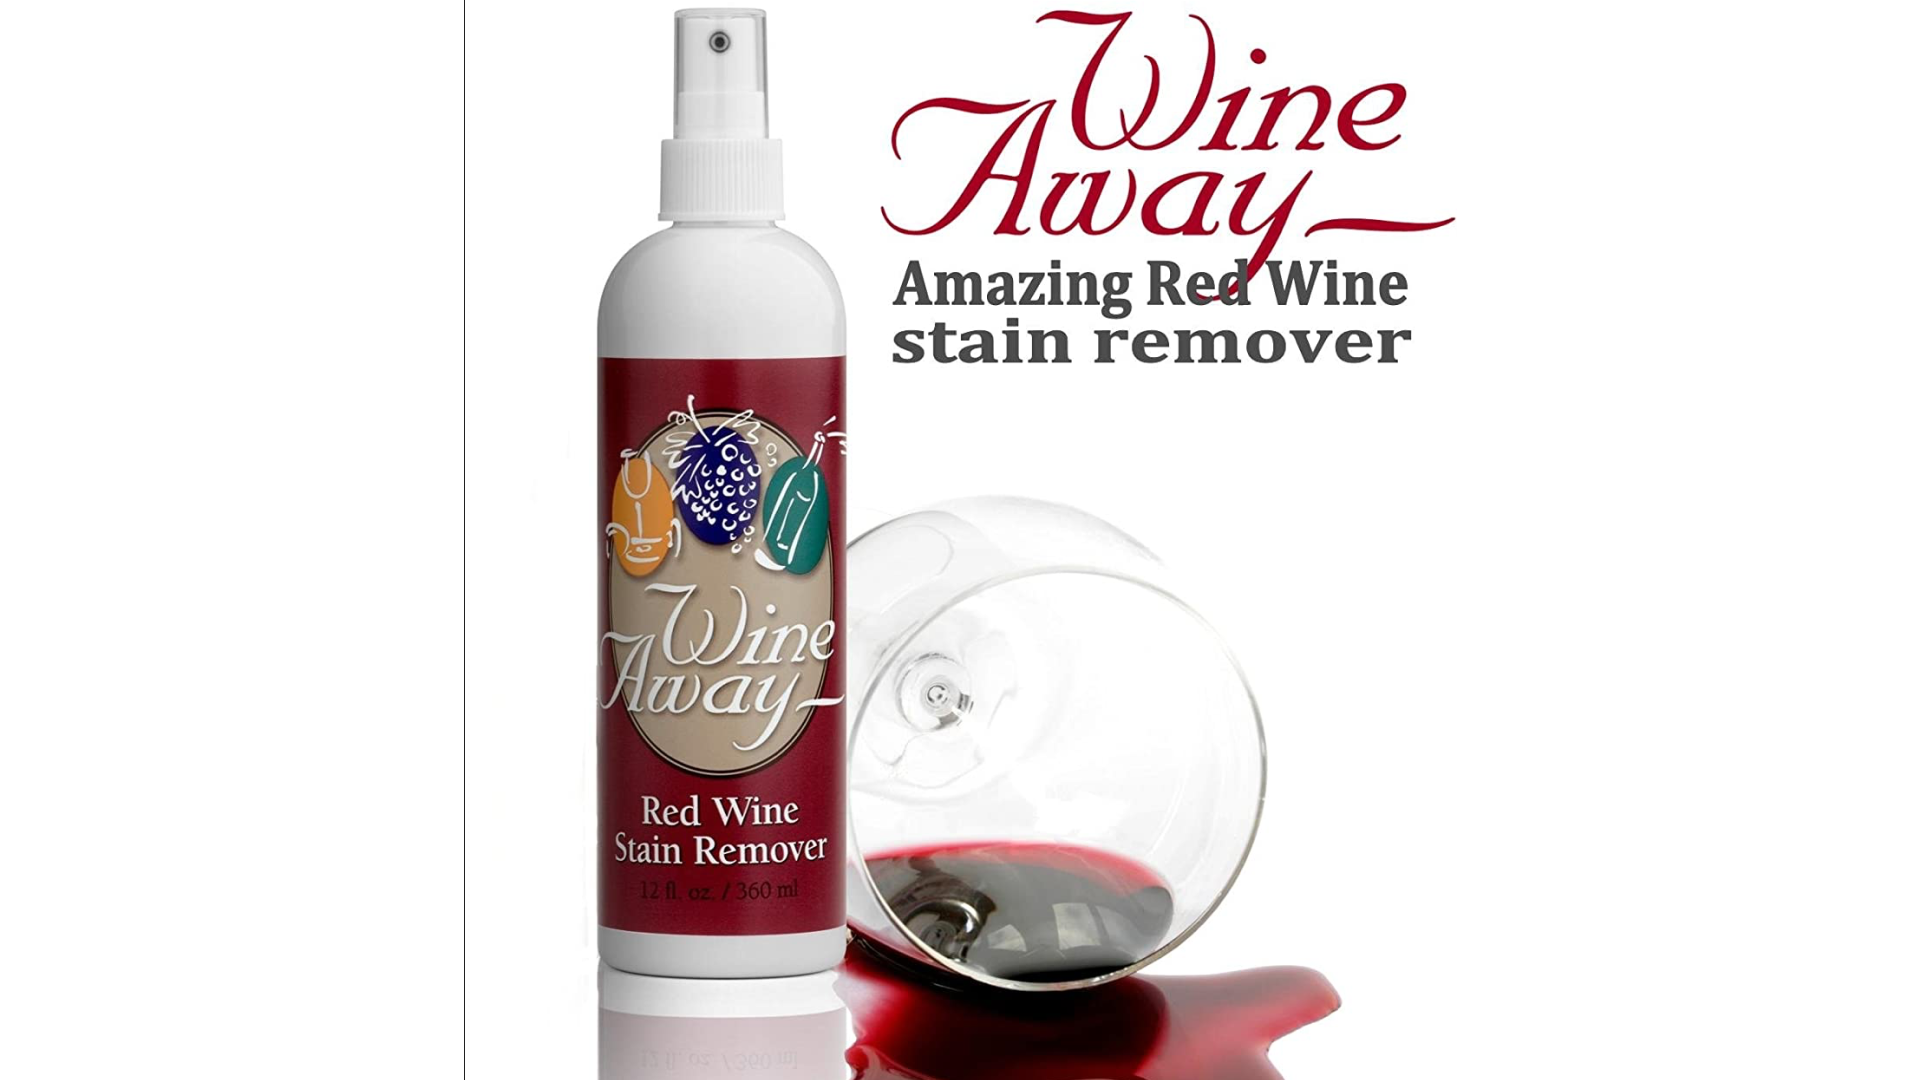 Wine stain remover